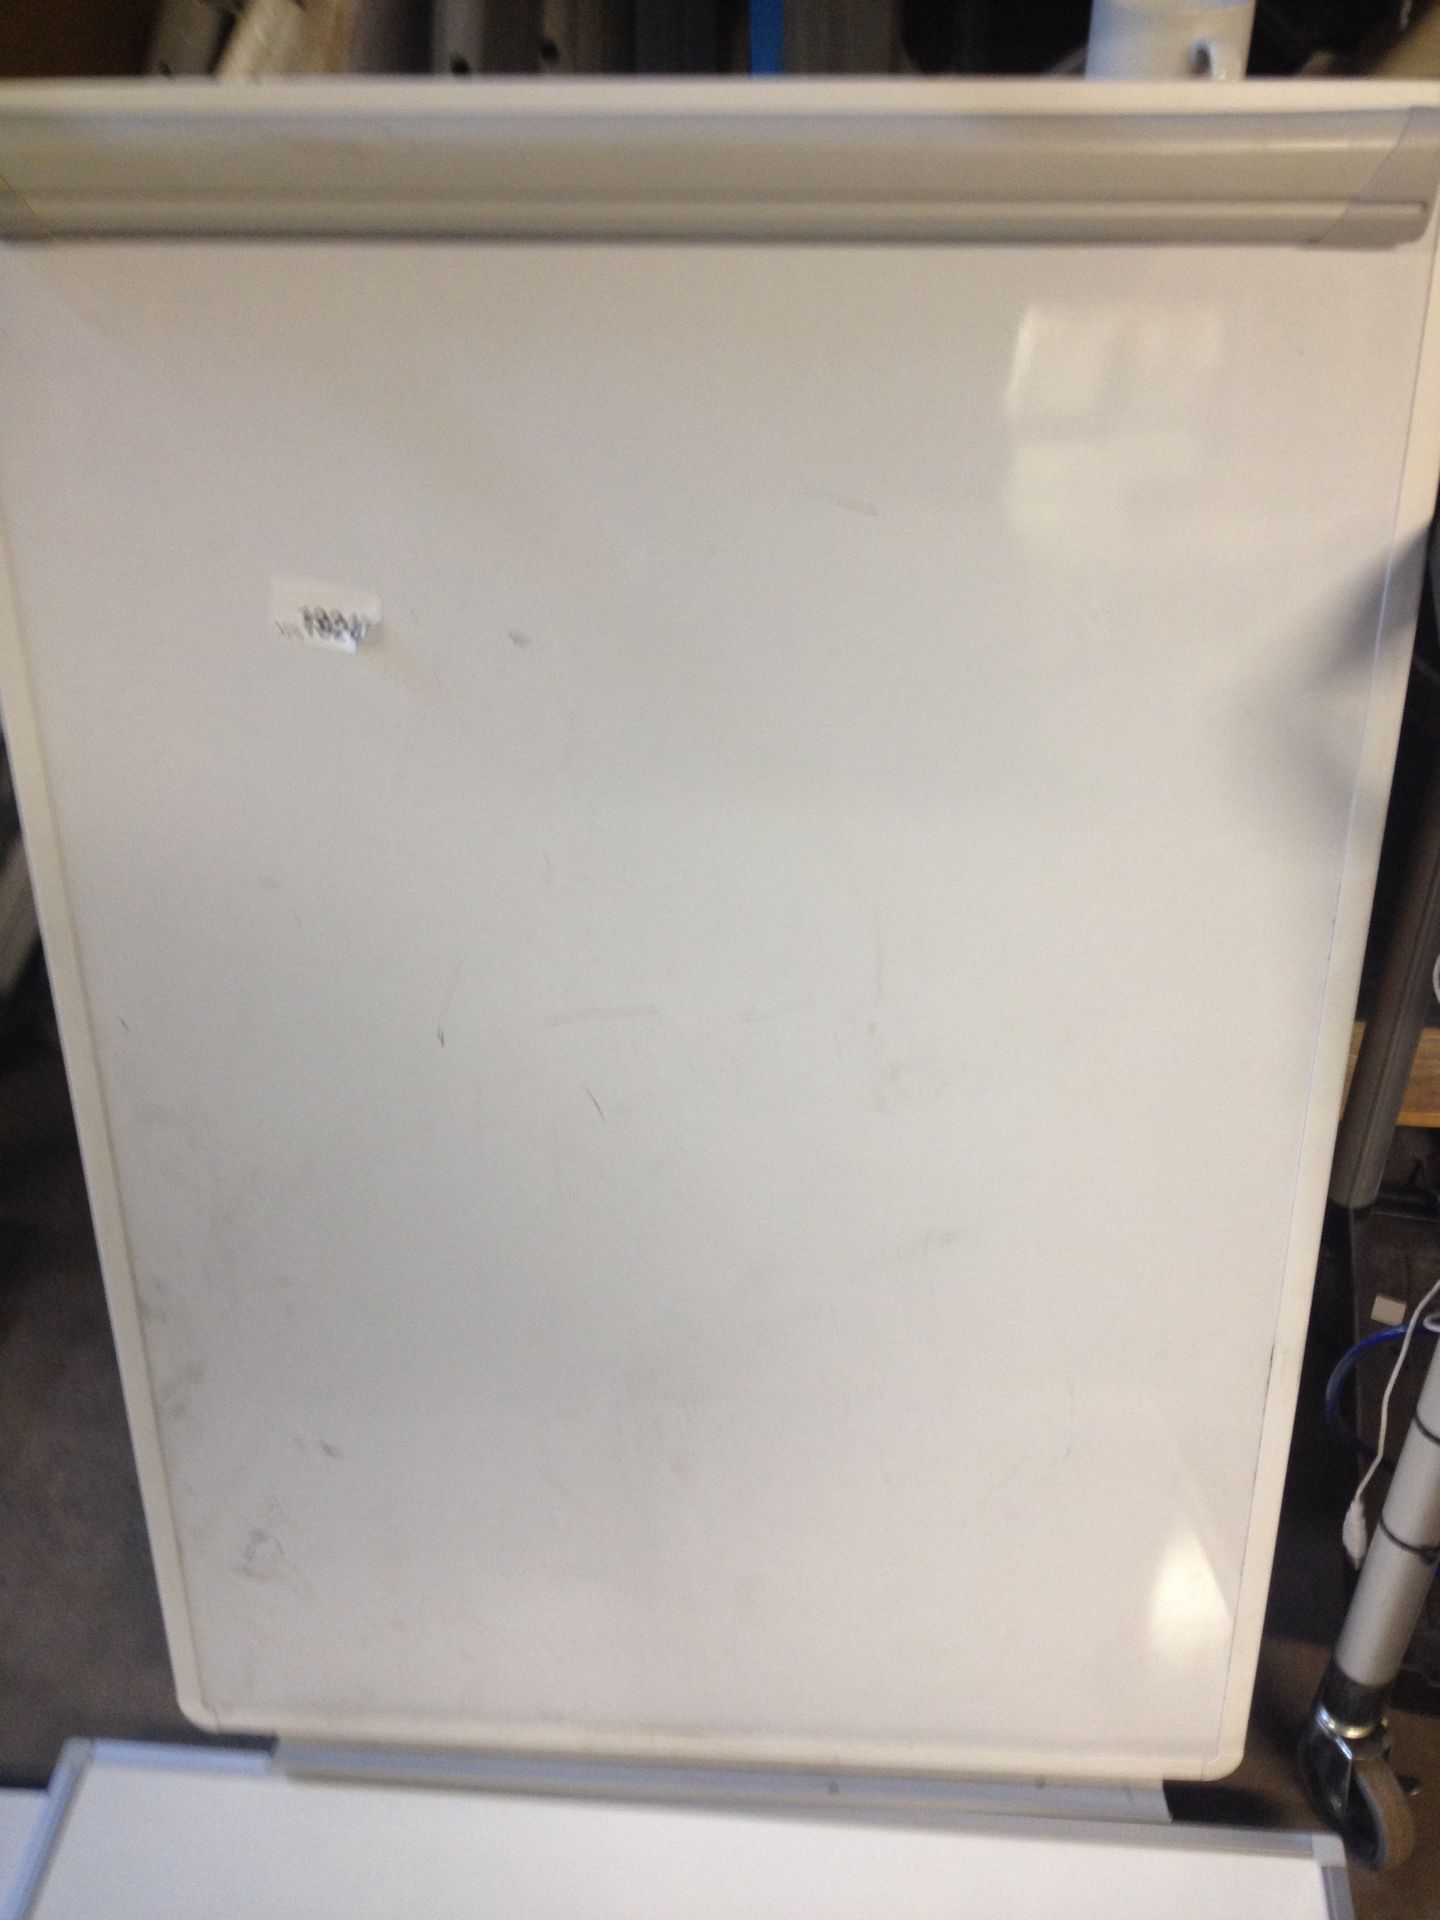 2 x Display Stands, 1 x Flip Chart Stand,2 x Whiteboards - Image 2 of 3